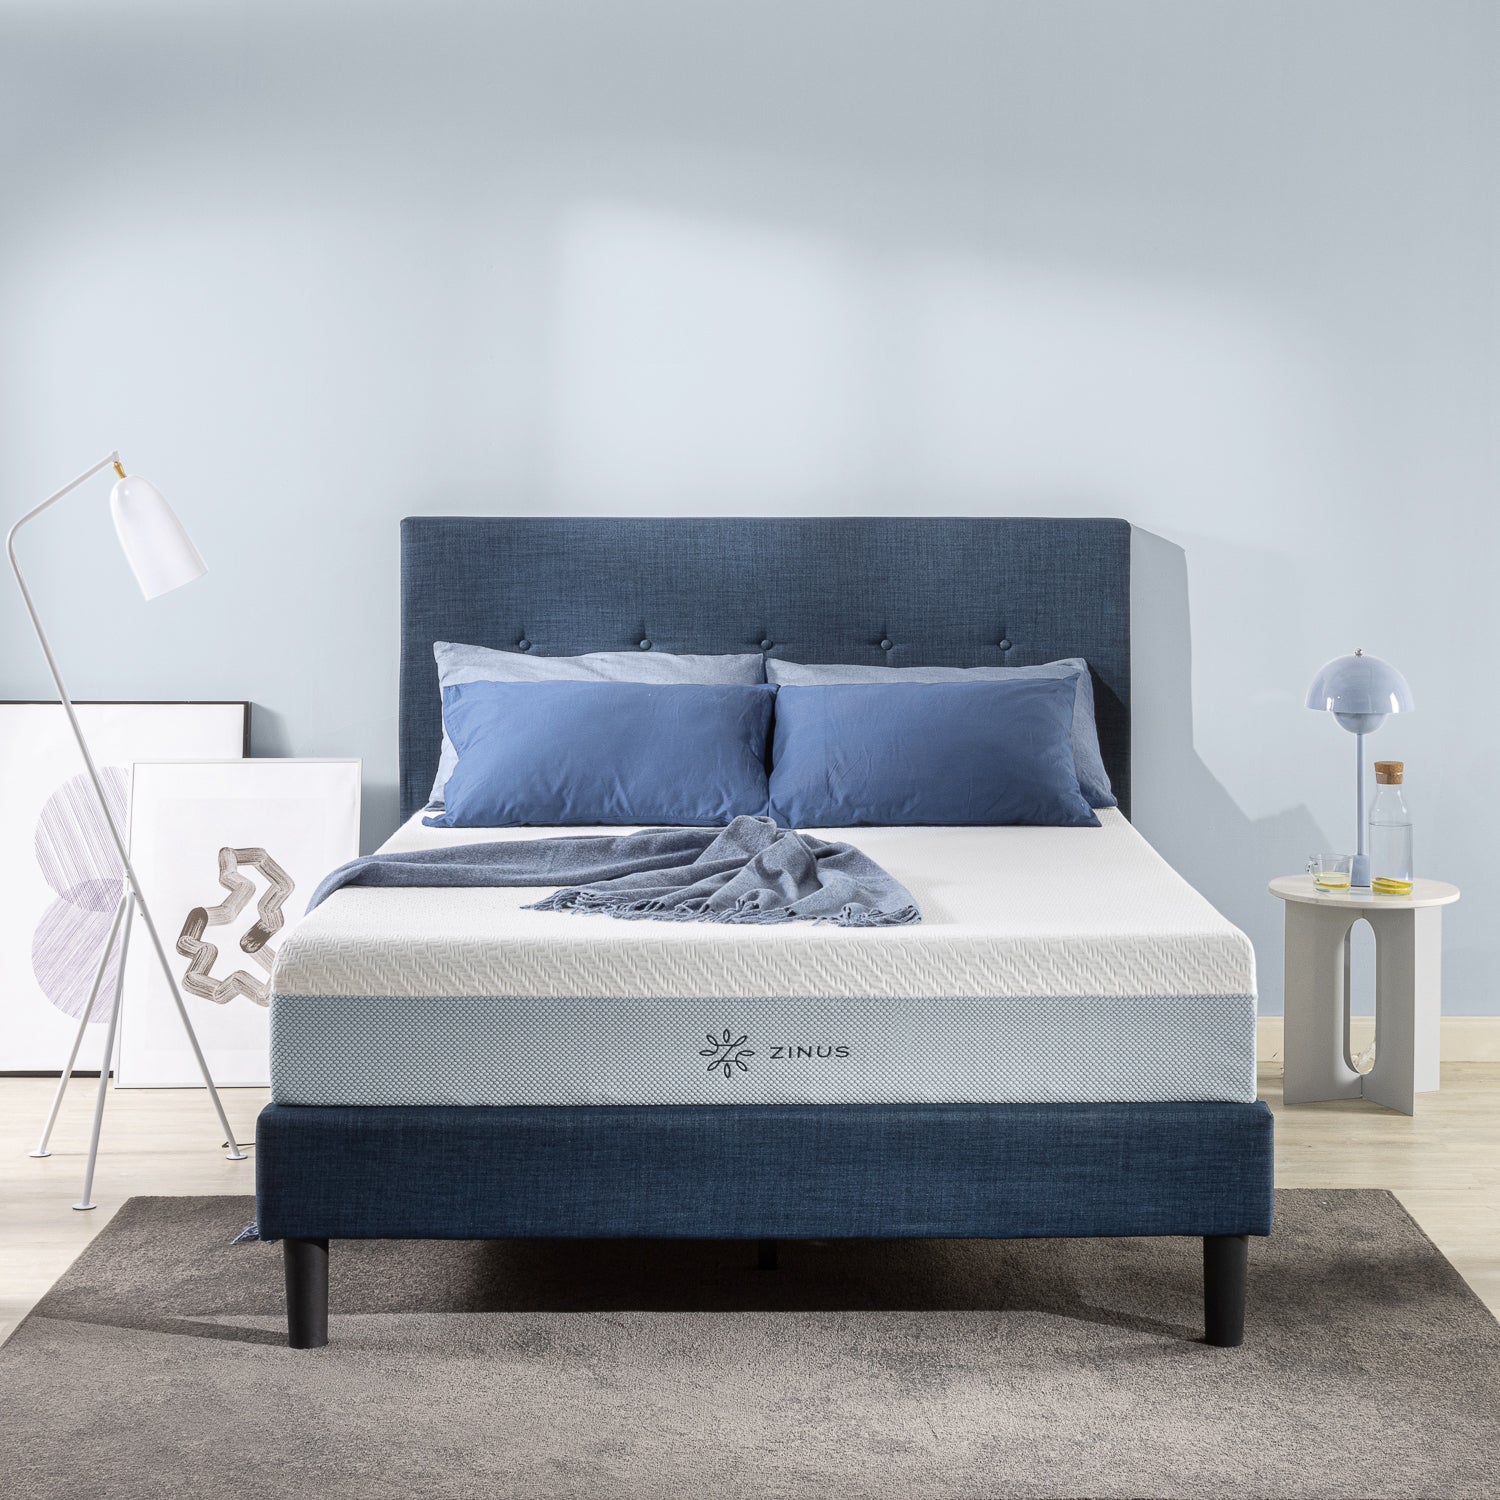 Memory foam mattress paired with blue bedding and headboard